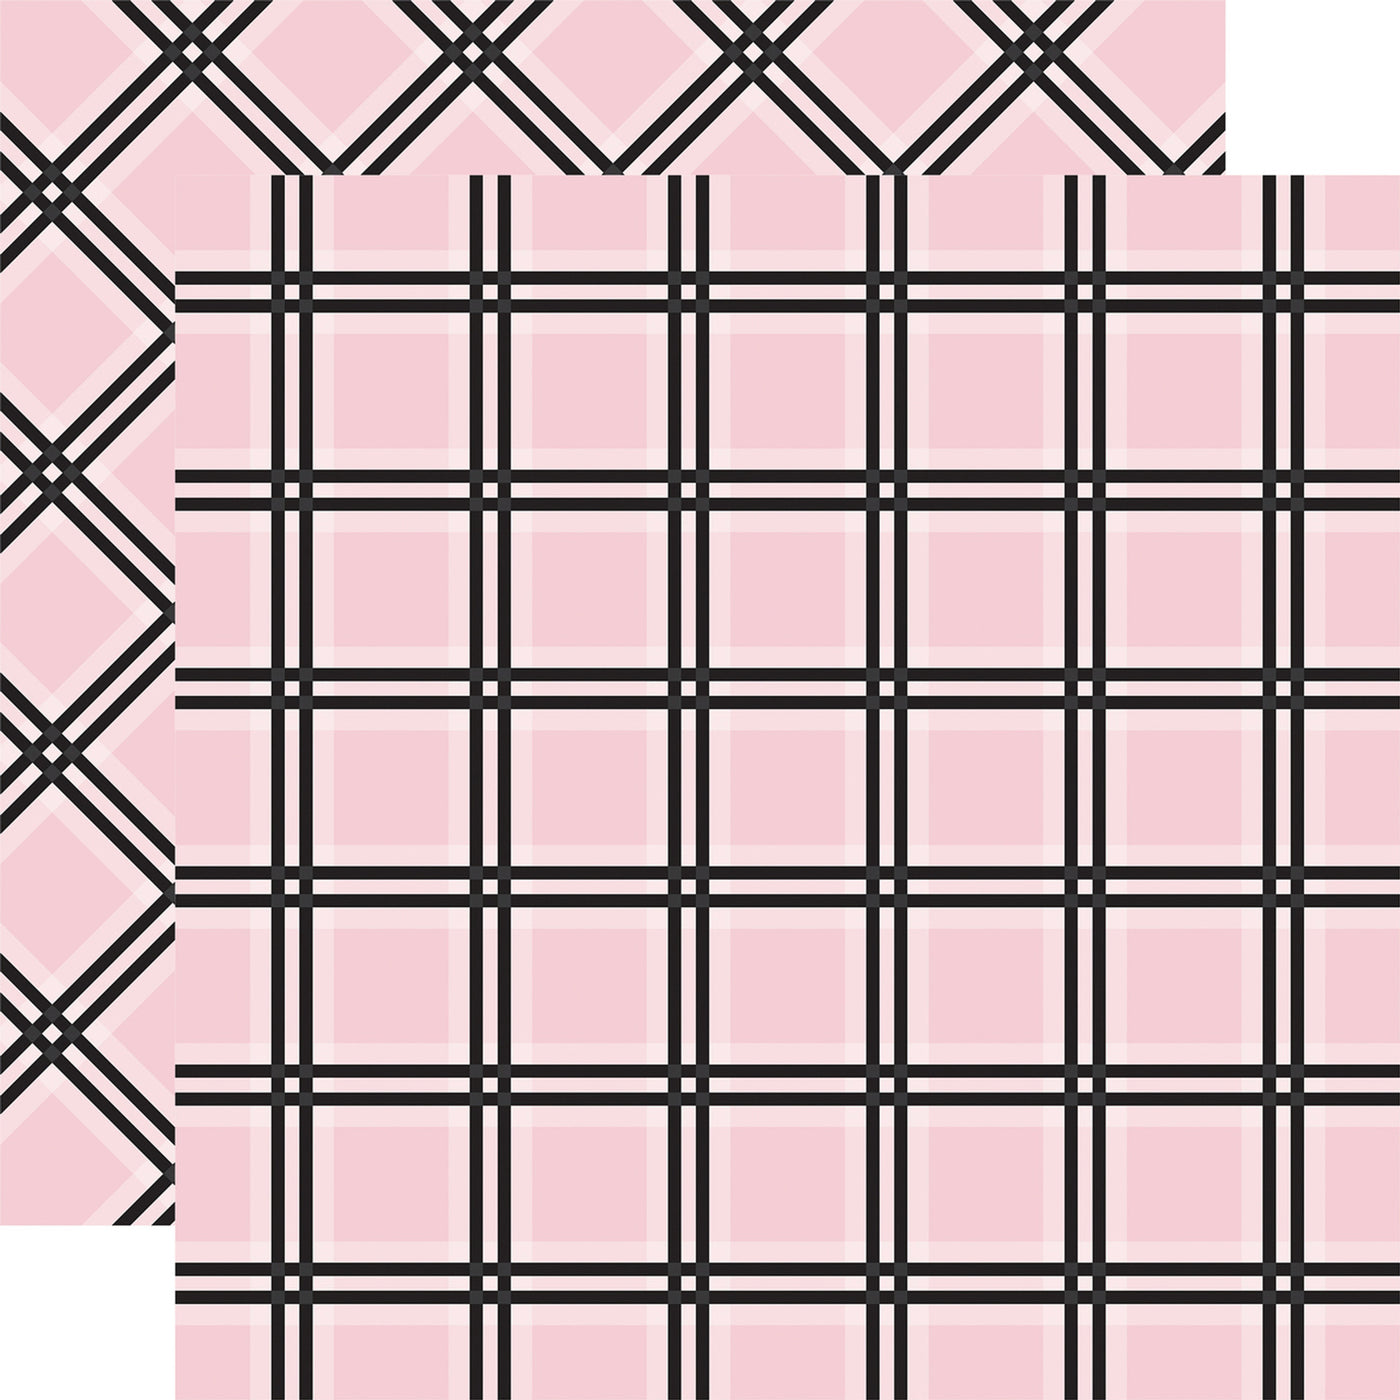 Double-sided 12x12 cardstock sheets of Pink Tattersall Plaid. Each side is different but coordinated. 80 lb. Felt texture.